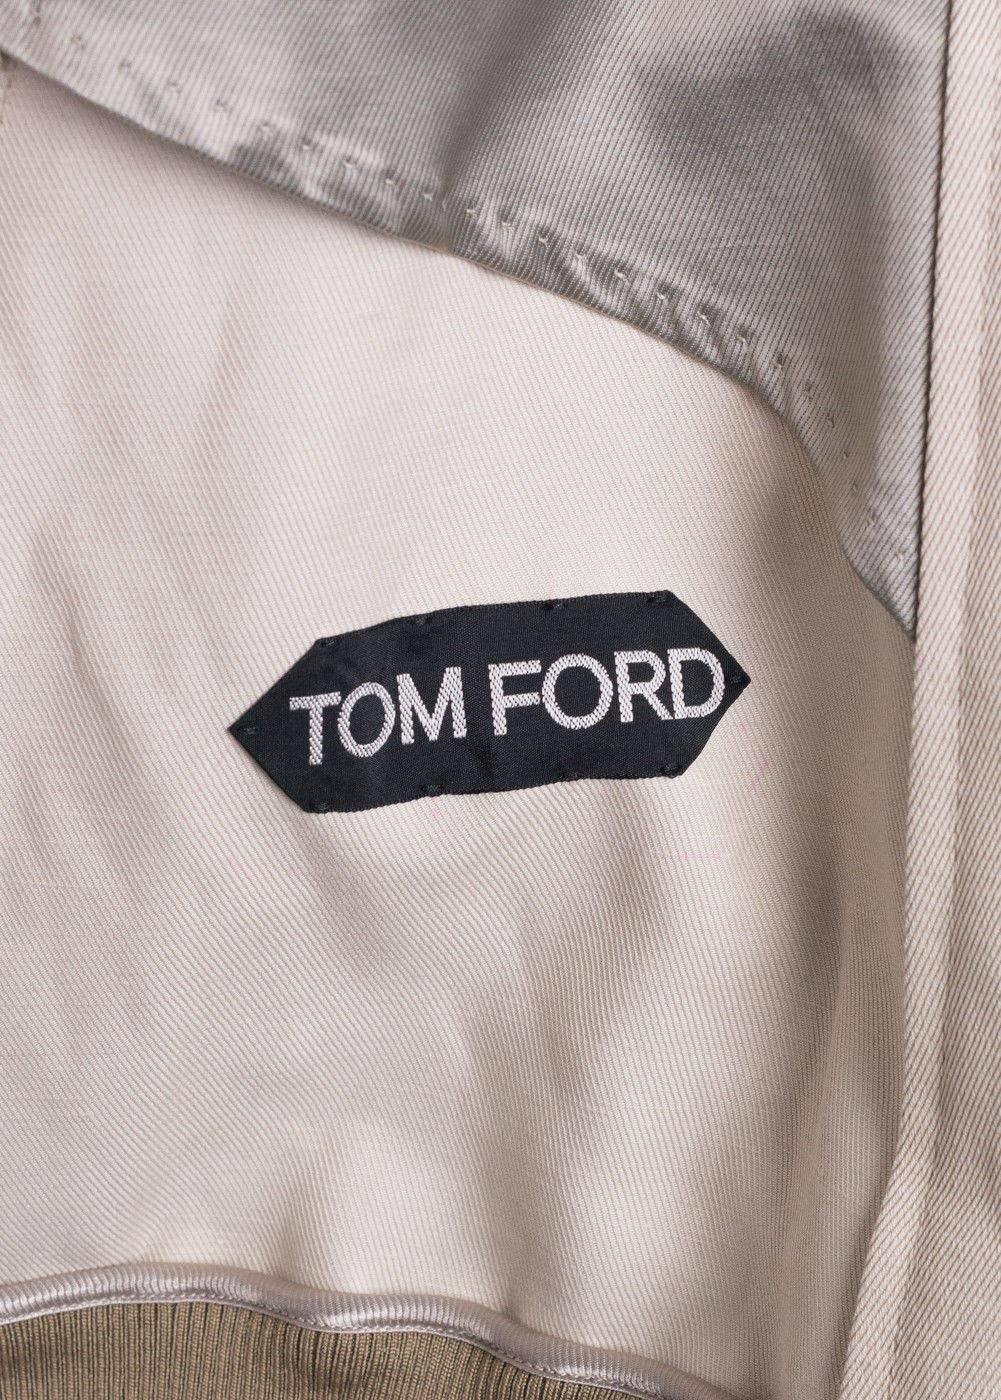 Brand New Tom Ford Twill Sports Jacket
Original Tags & Hanger Included
Retails In-Store & Online for $3,550
Size EUR 50 / US 40 Fits True to Size

Tom Ford never fails to impress with the Sartorial Sports Jacket. This beige piece features a fine